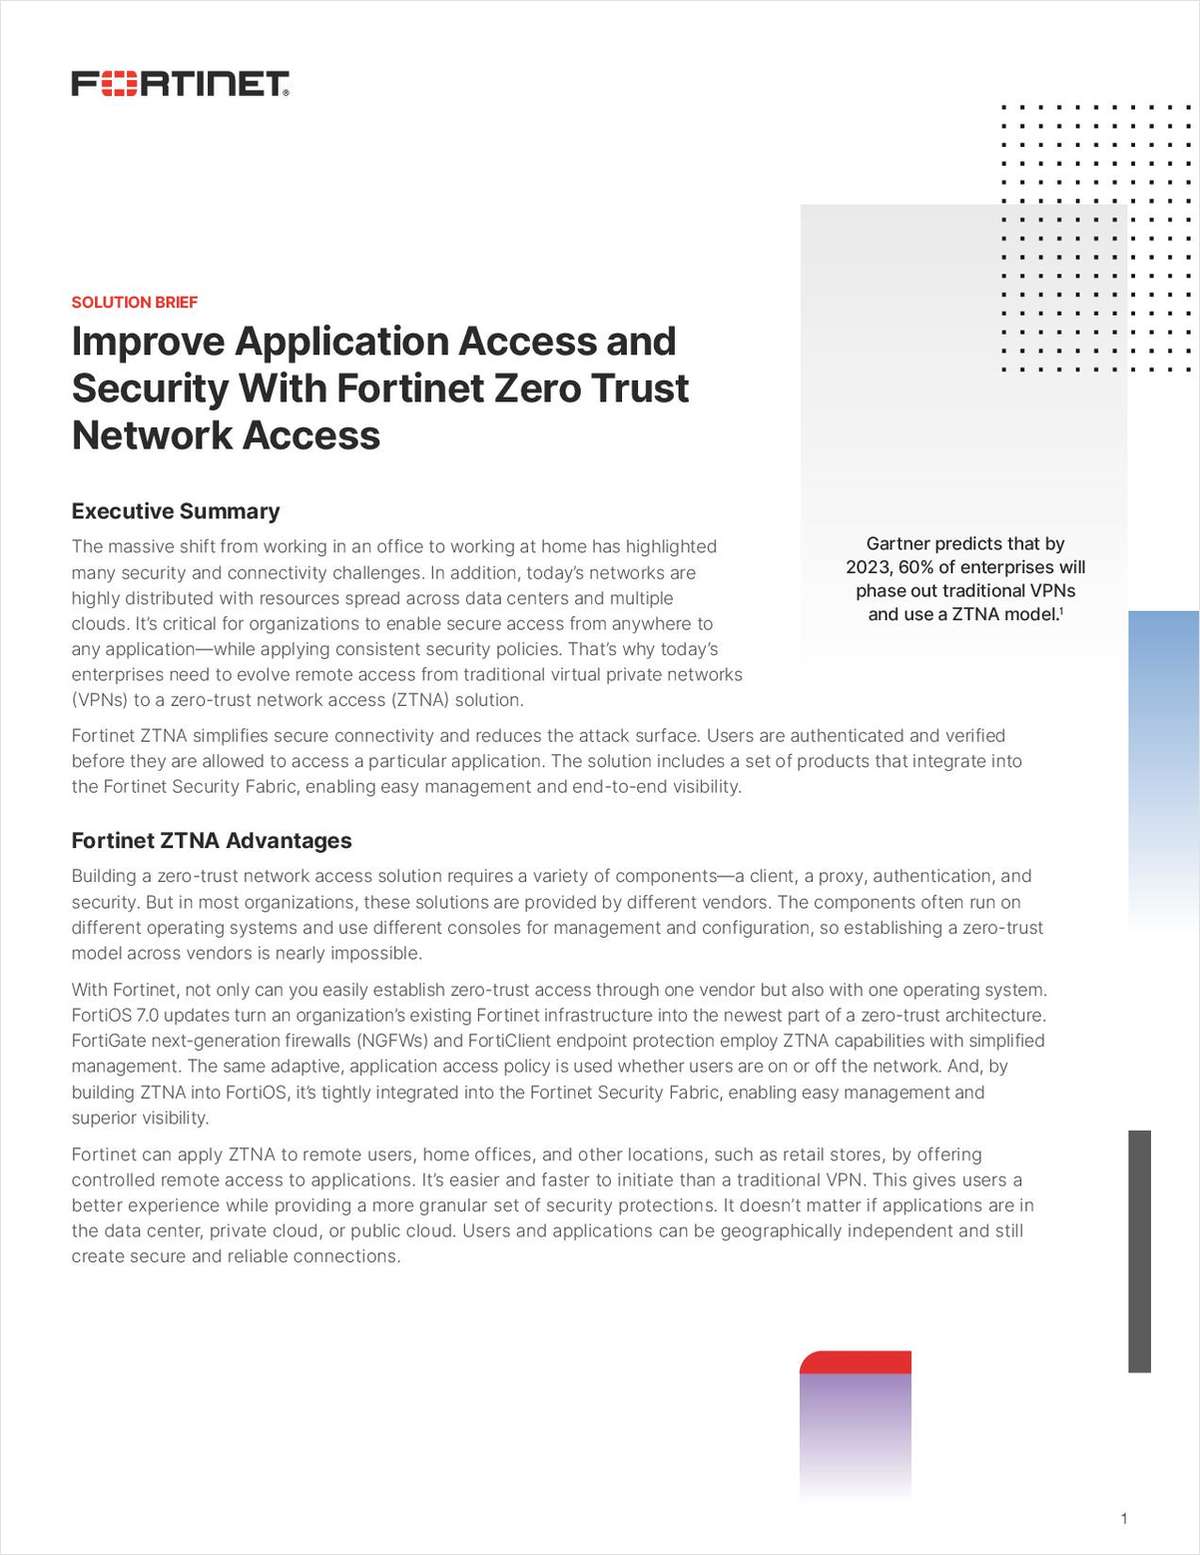 Improve Application Access and Security With Fortinet Zero Trust